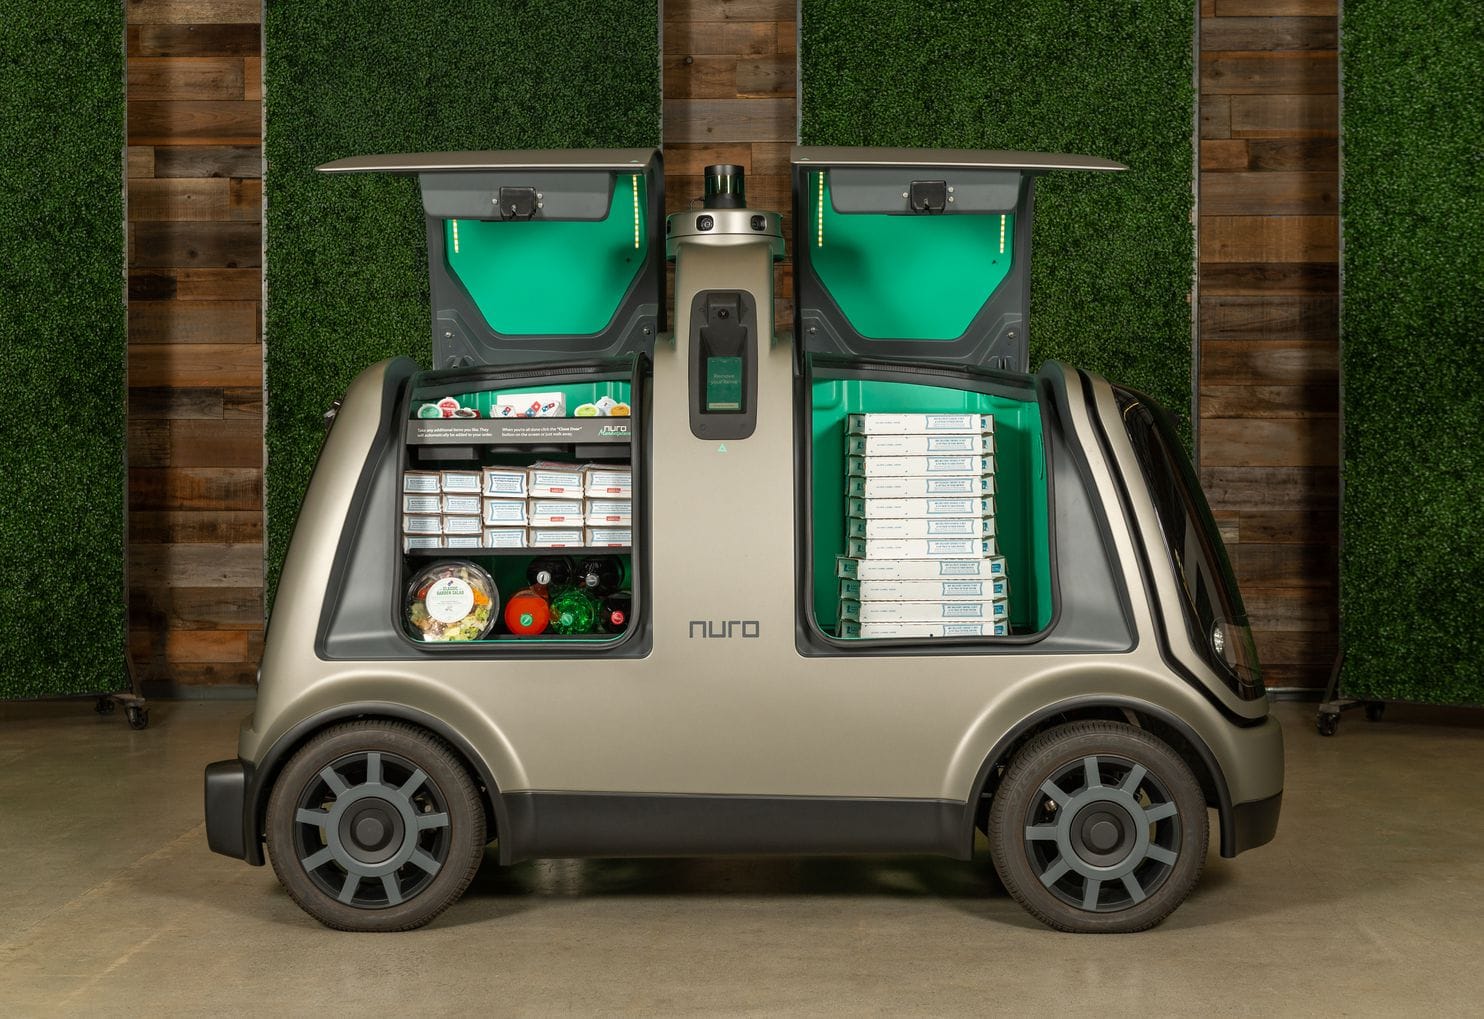 Meals on selfdriving wheels Nuro and Domino's partner for autonomous